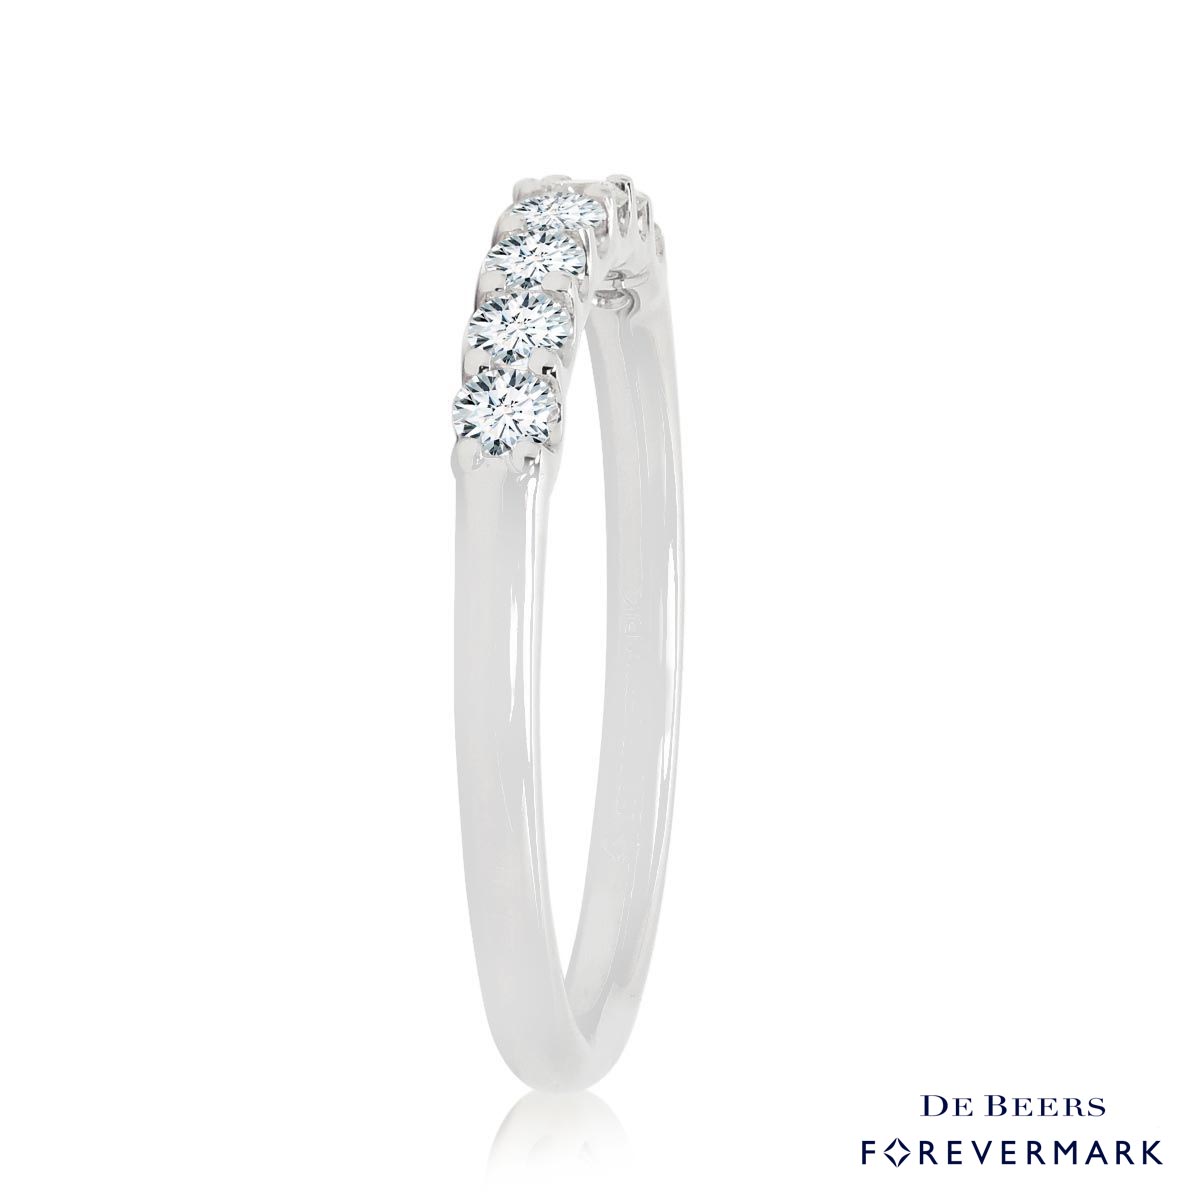 De Beers Forevermark Petite Diamond Wedding Band in 18kt White Gold (1/3ct tw)